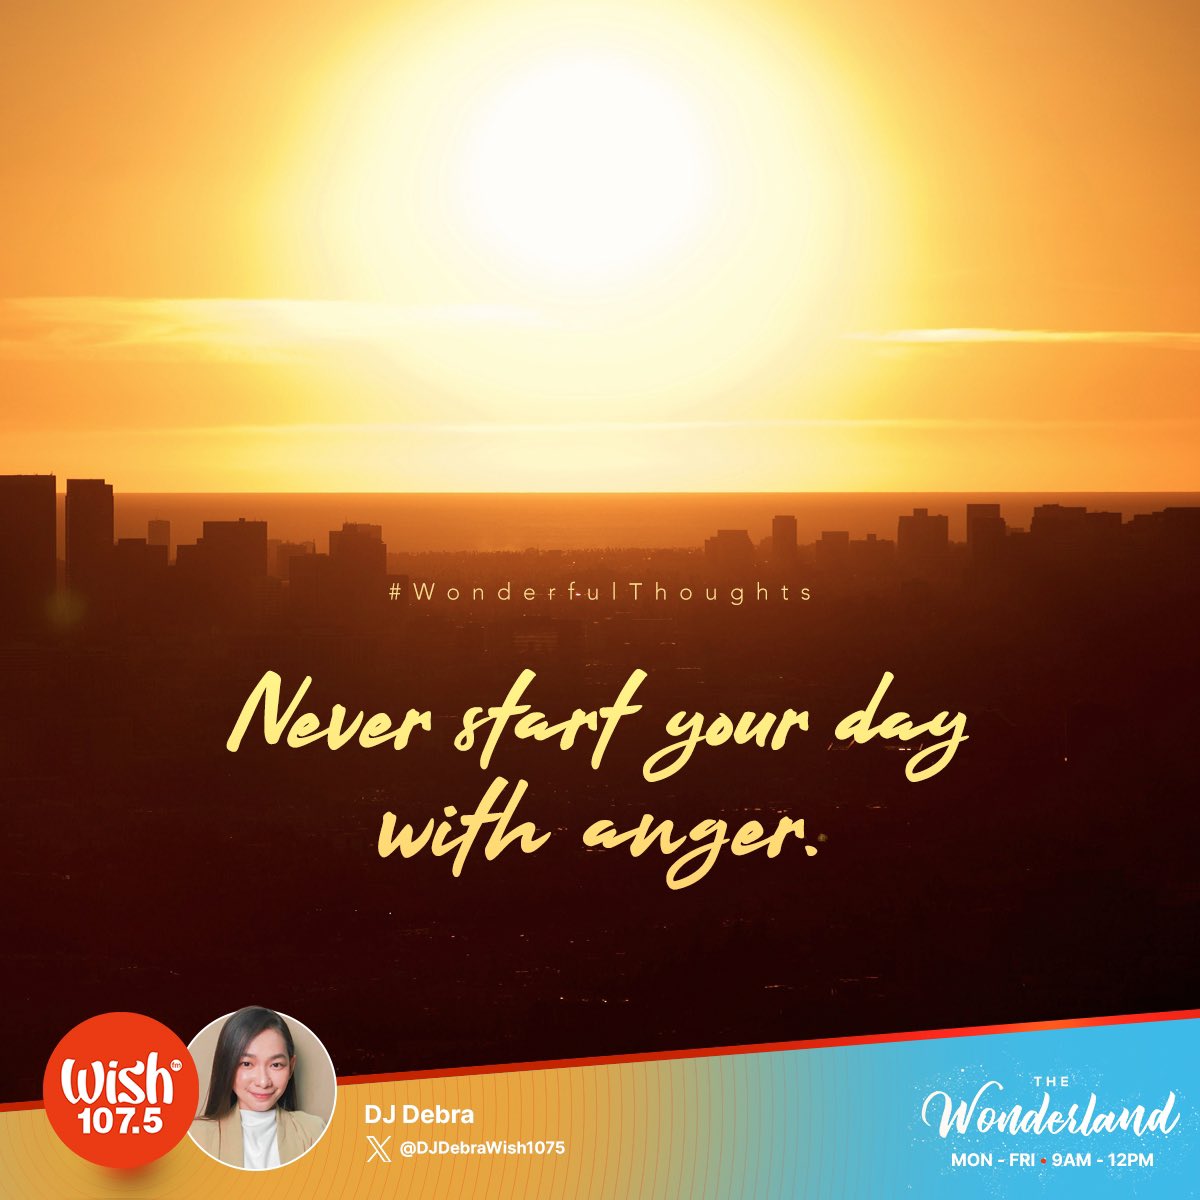 #WonderfulThoughts: Never start your day with anger.

Tune in to the Wonderland and enjoy the perfect mix of classic and contemporary hits from 9 a.m. until noon! Live streaming is also available via wish1075.com.